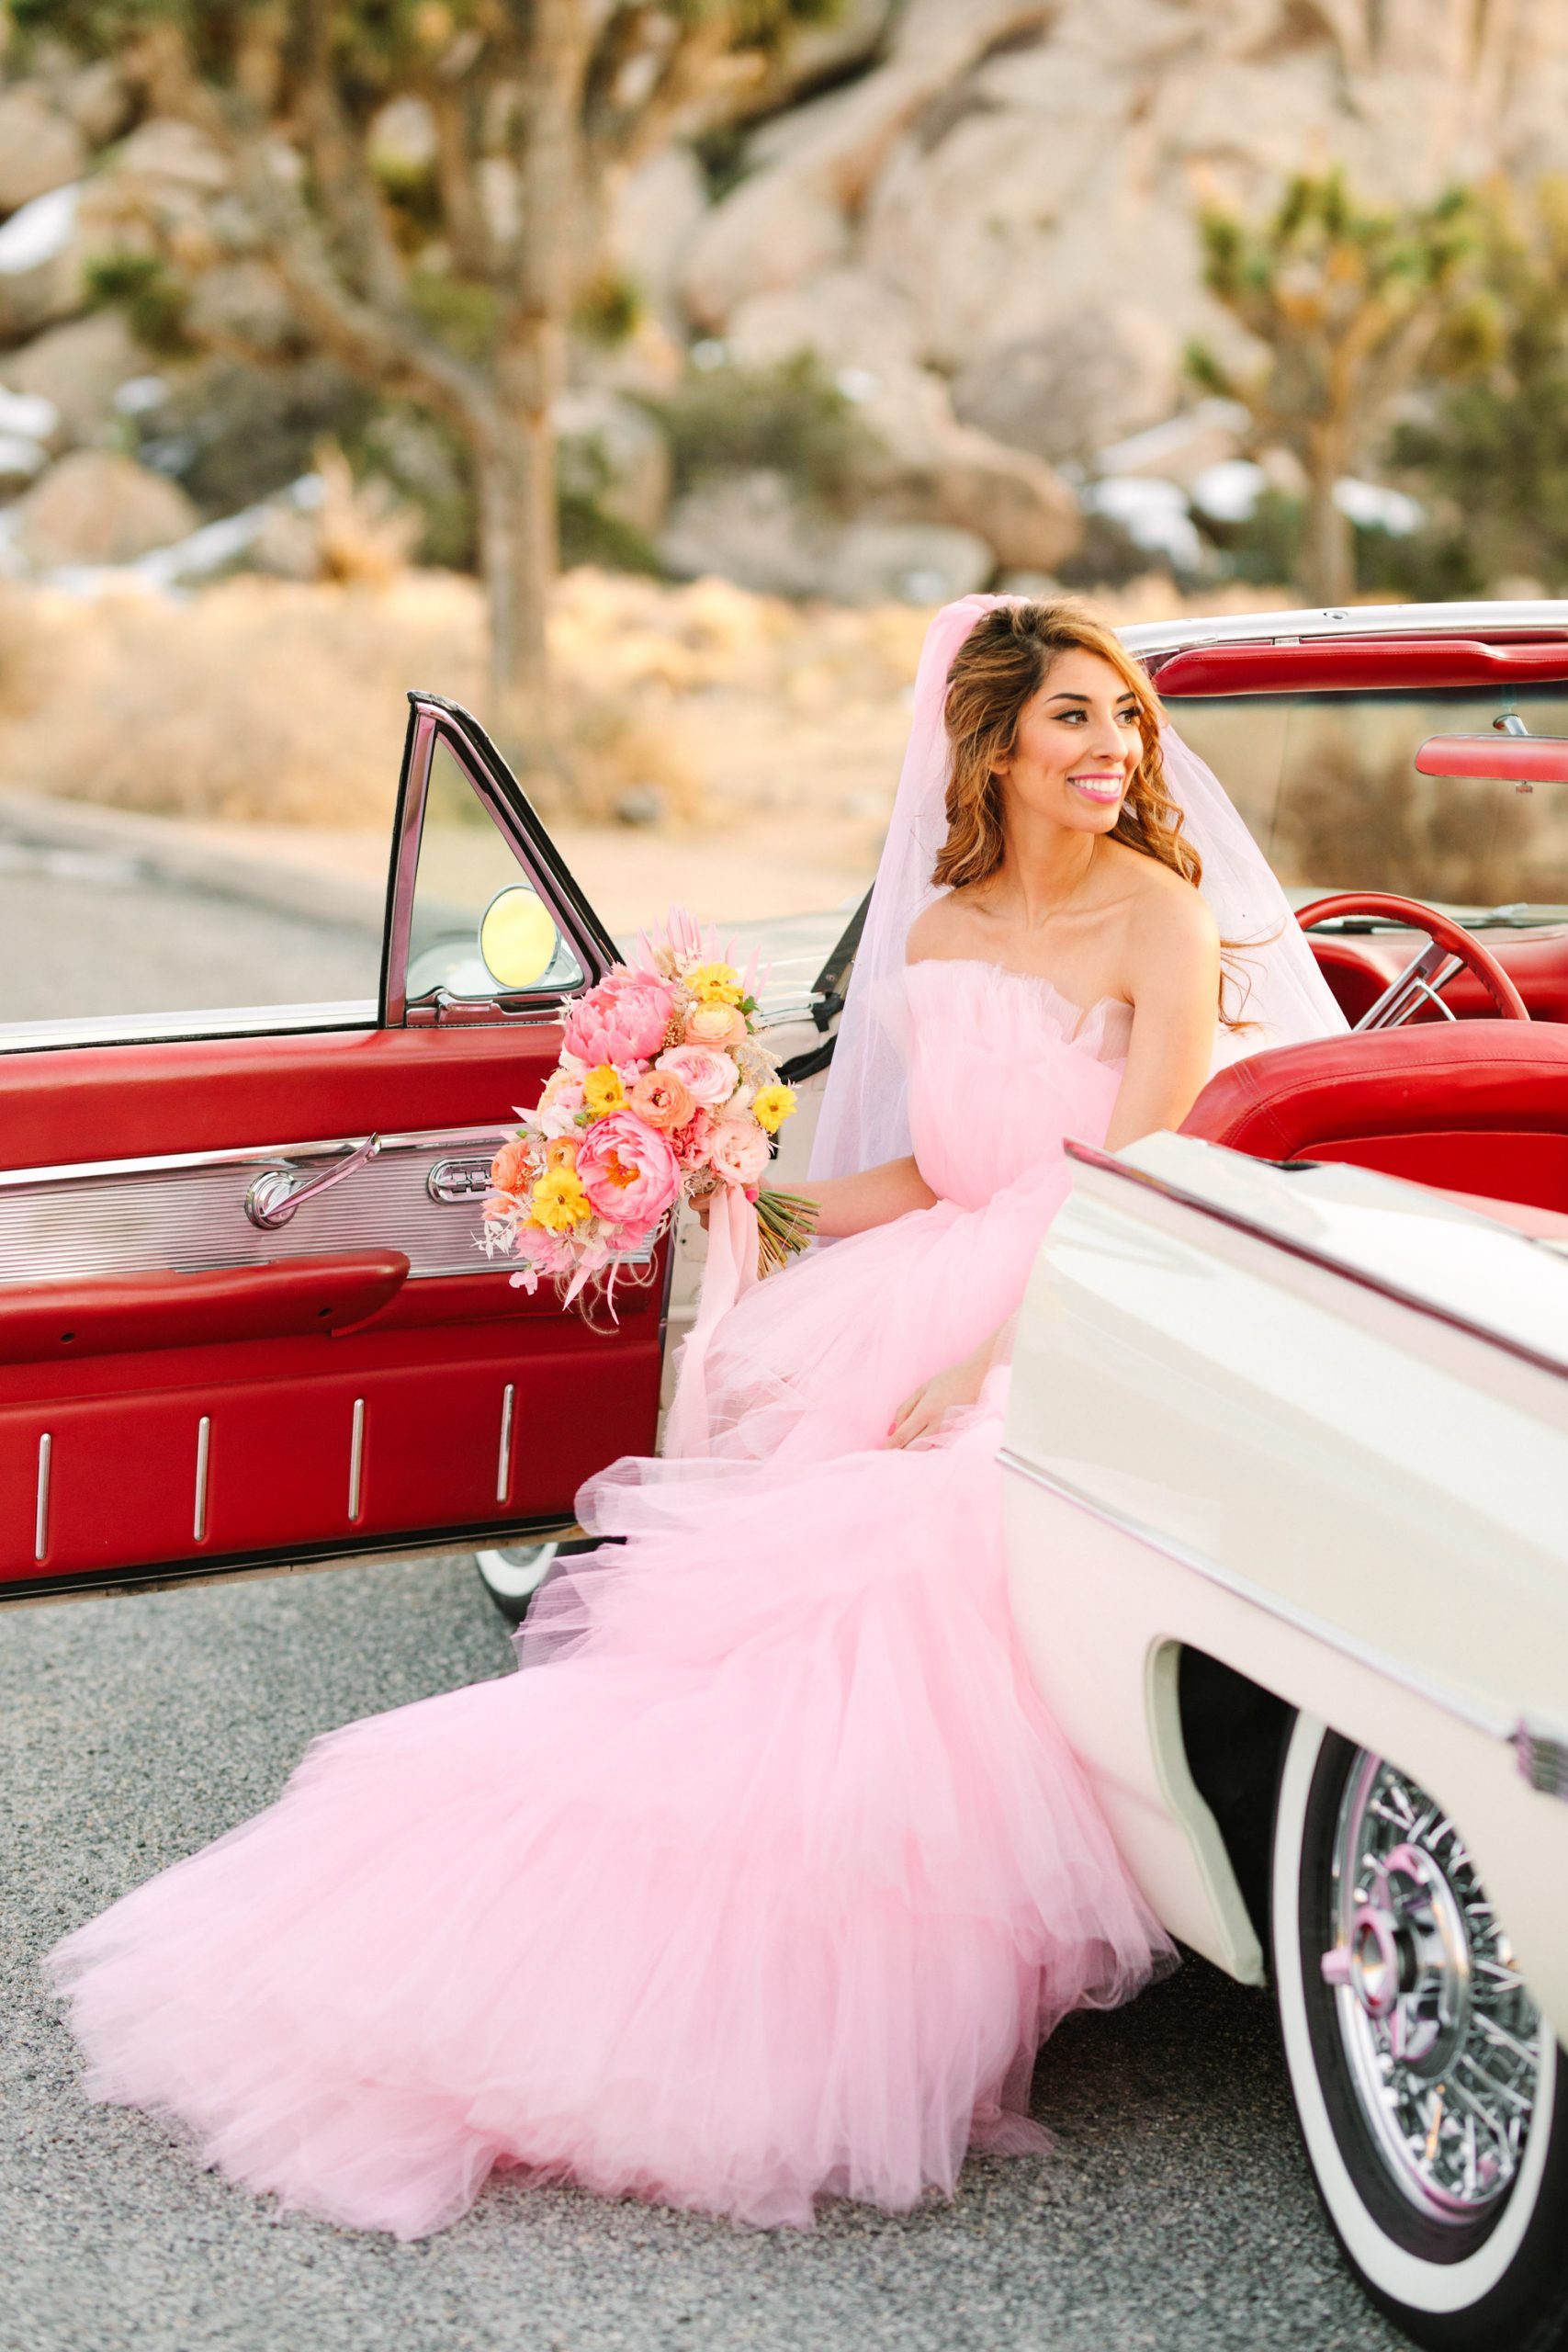 Bride sitting in white classic Ford Thunderbird convertible | Pink wedding dress Joshua Tree elopement featured on Green Wedding Shoes | Colorful desert wedding inspiration for fun-loving couples in Southern California #joshuatreewedding #joshuatreeelopement #pinkwedding #greenweddingshoes Source: Mary Costa Photography | Los Angeles